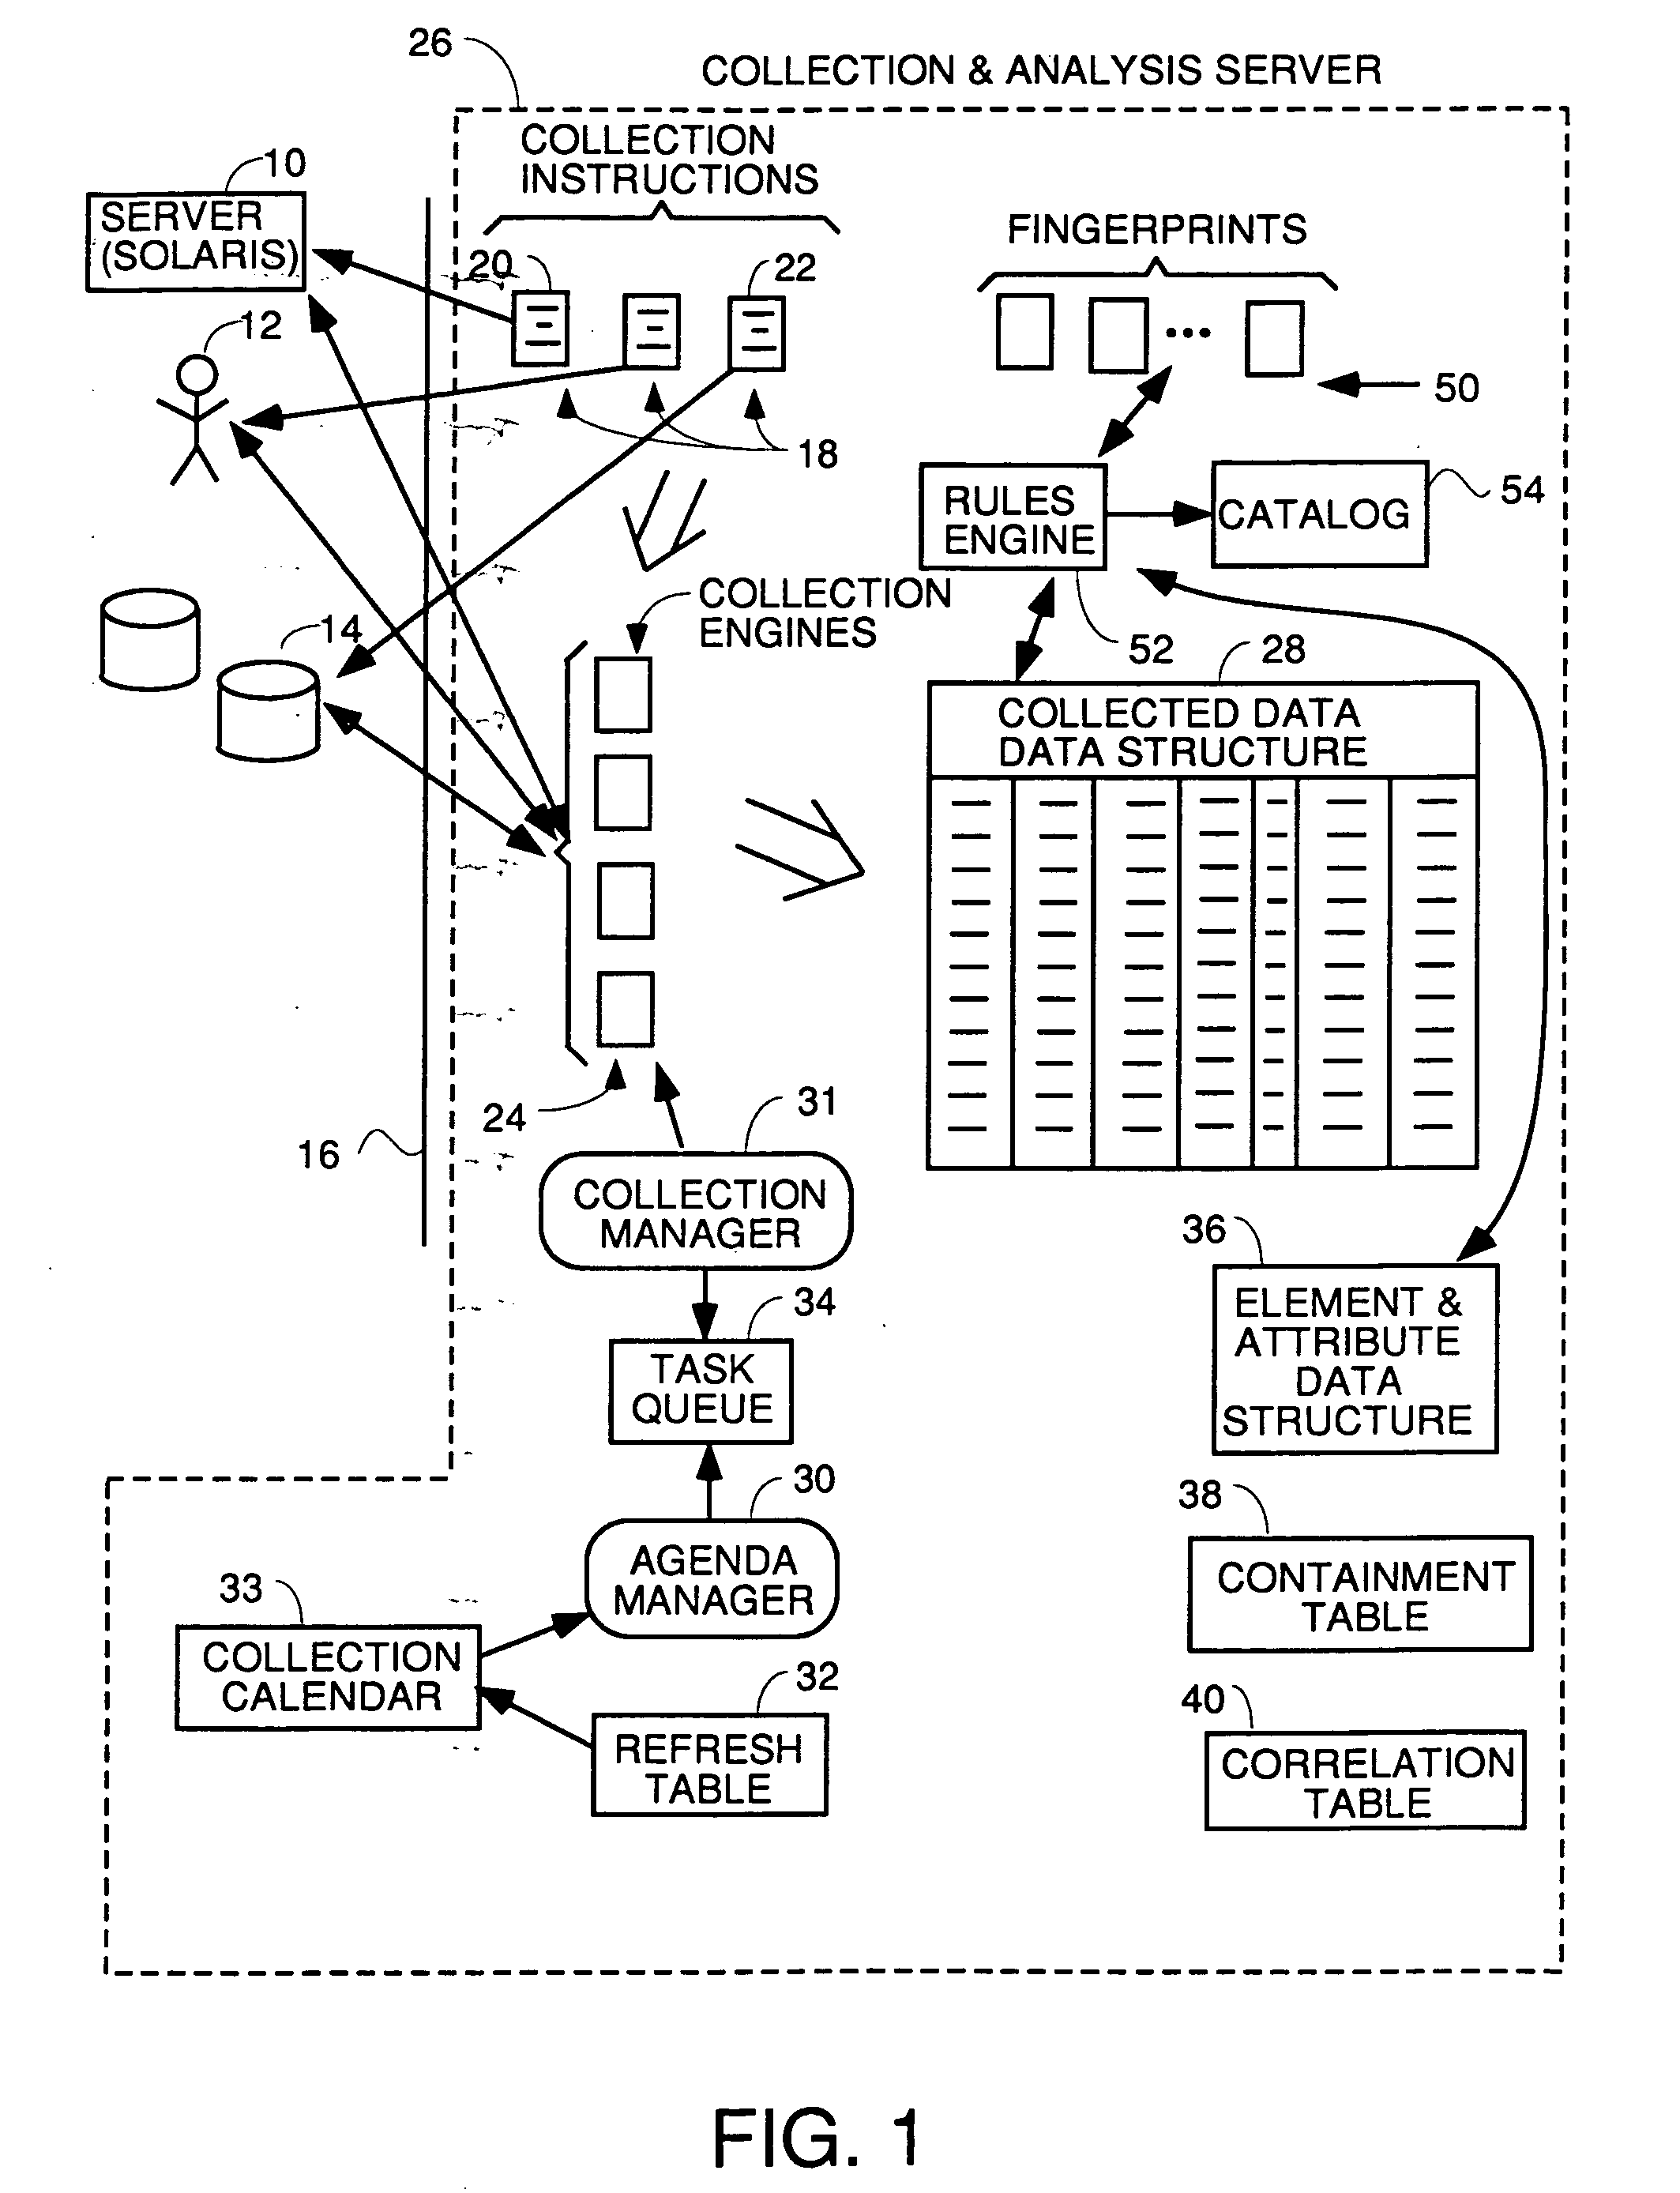 System for linking financial asset records with networked assets